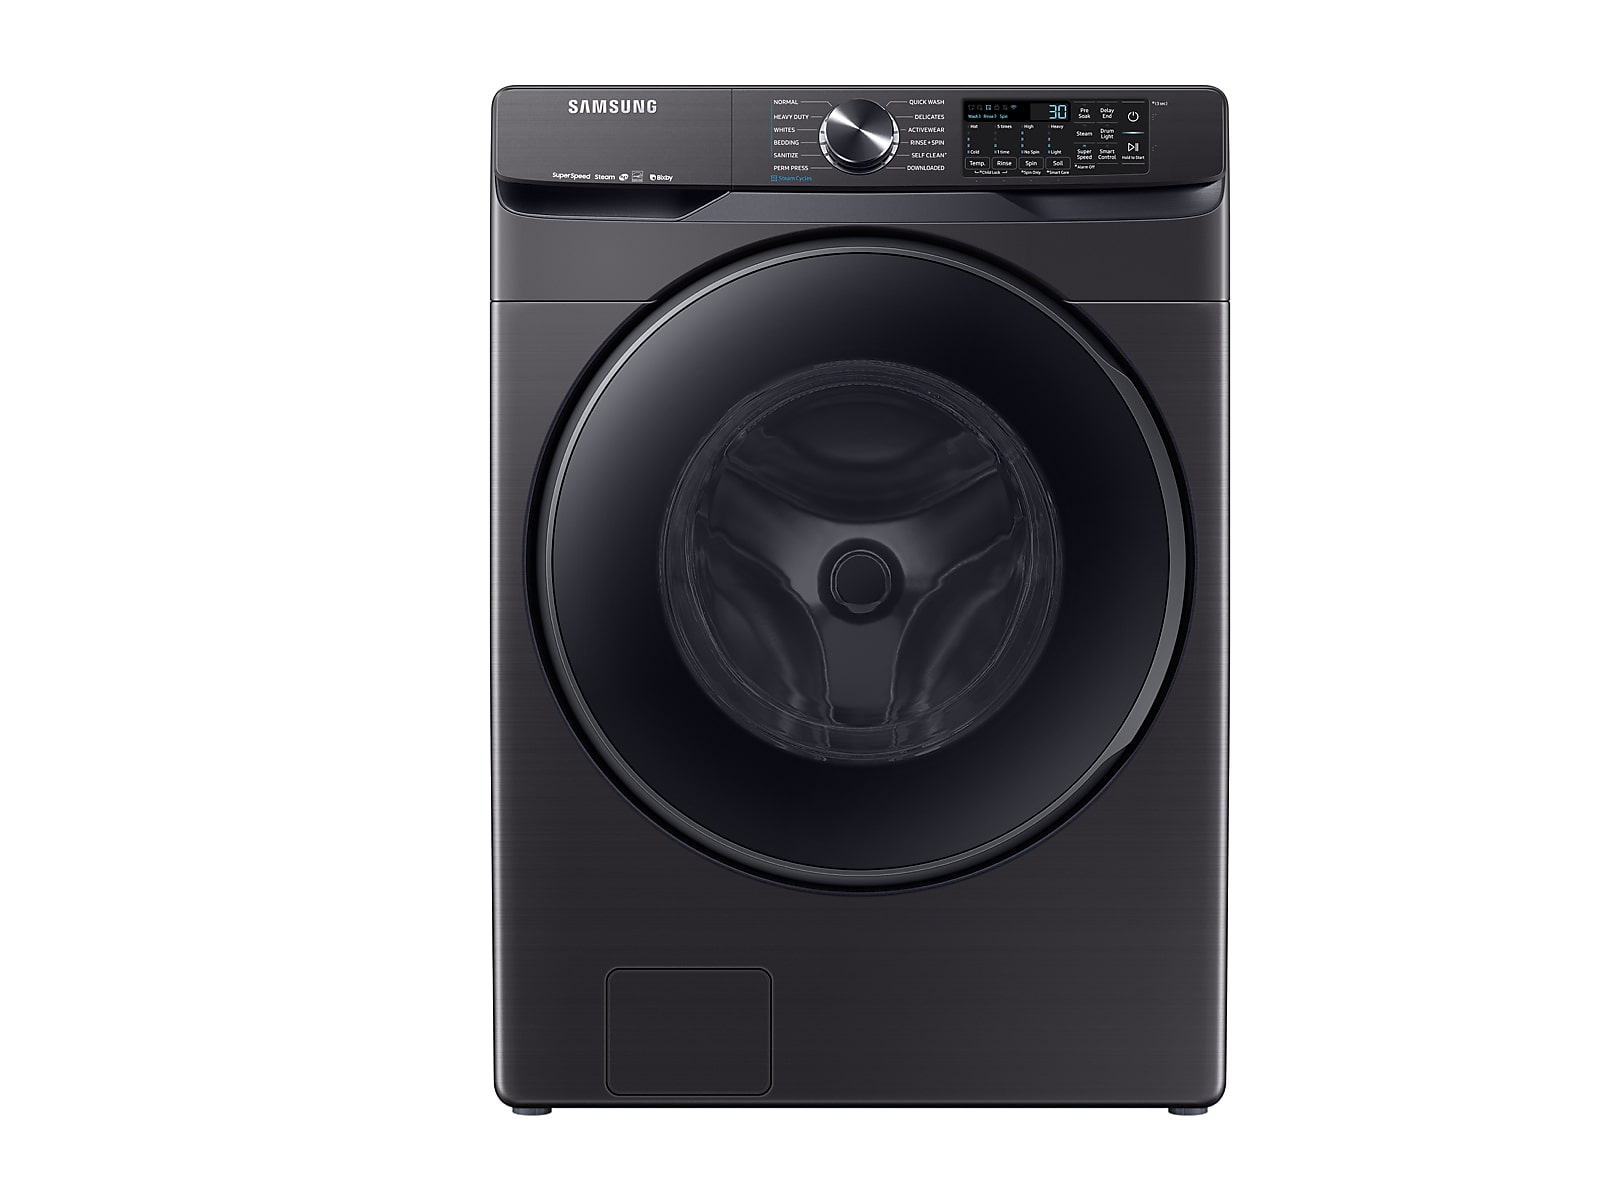 Samsung 5.0 cu. ft. Smart Front Load Washer with Super Speed in Black Stainless Steel(WF50R8500AV/US)